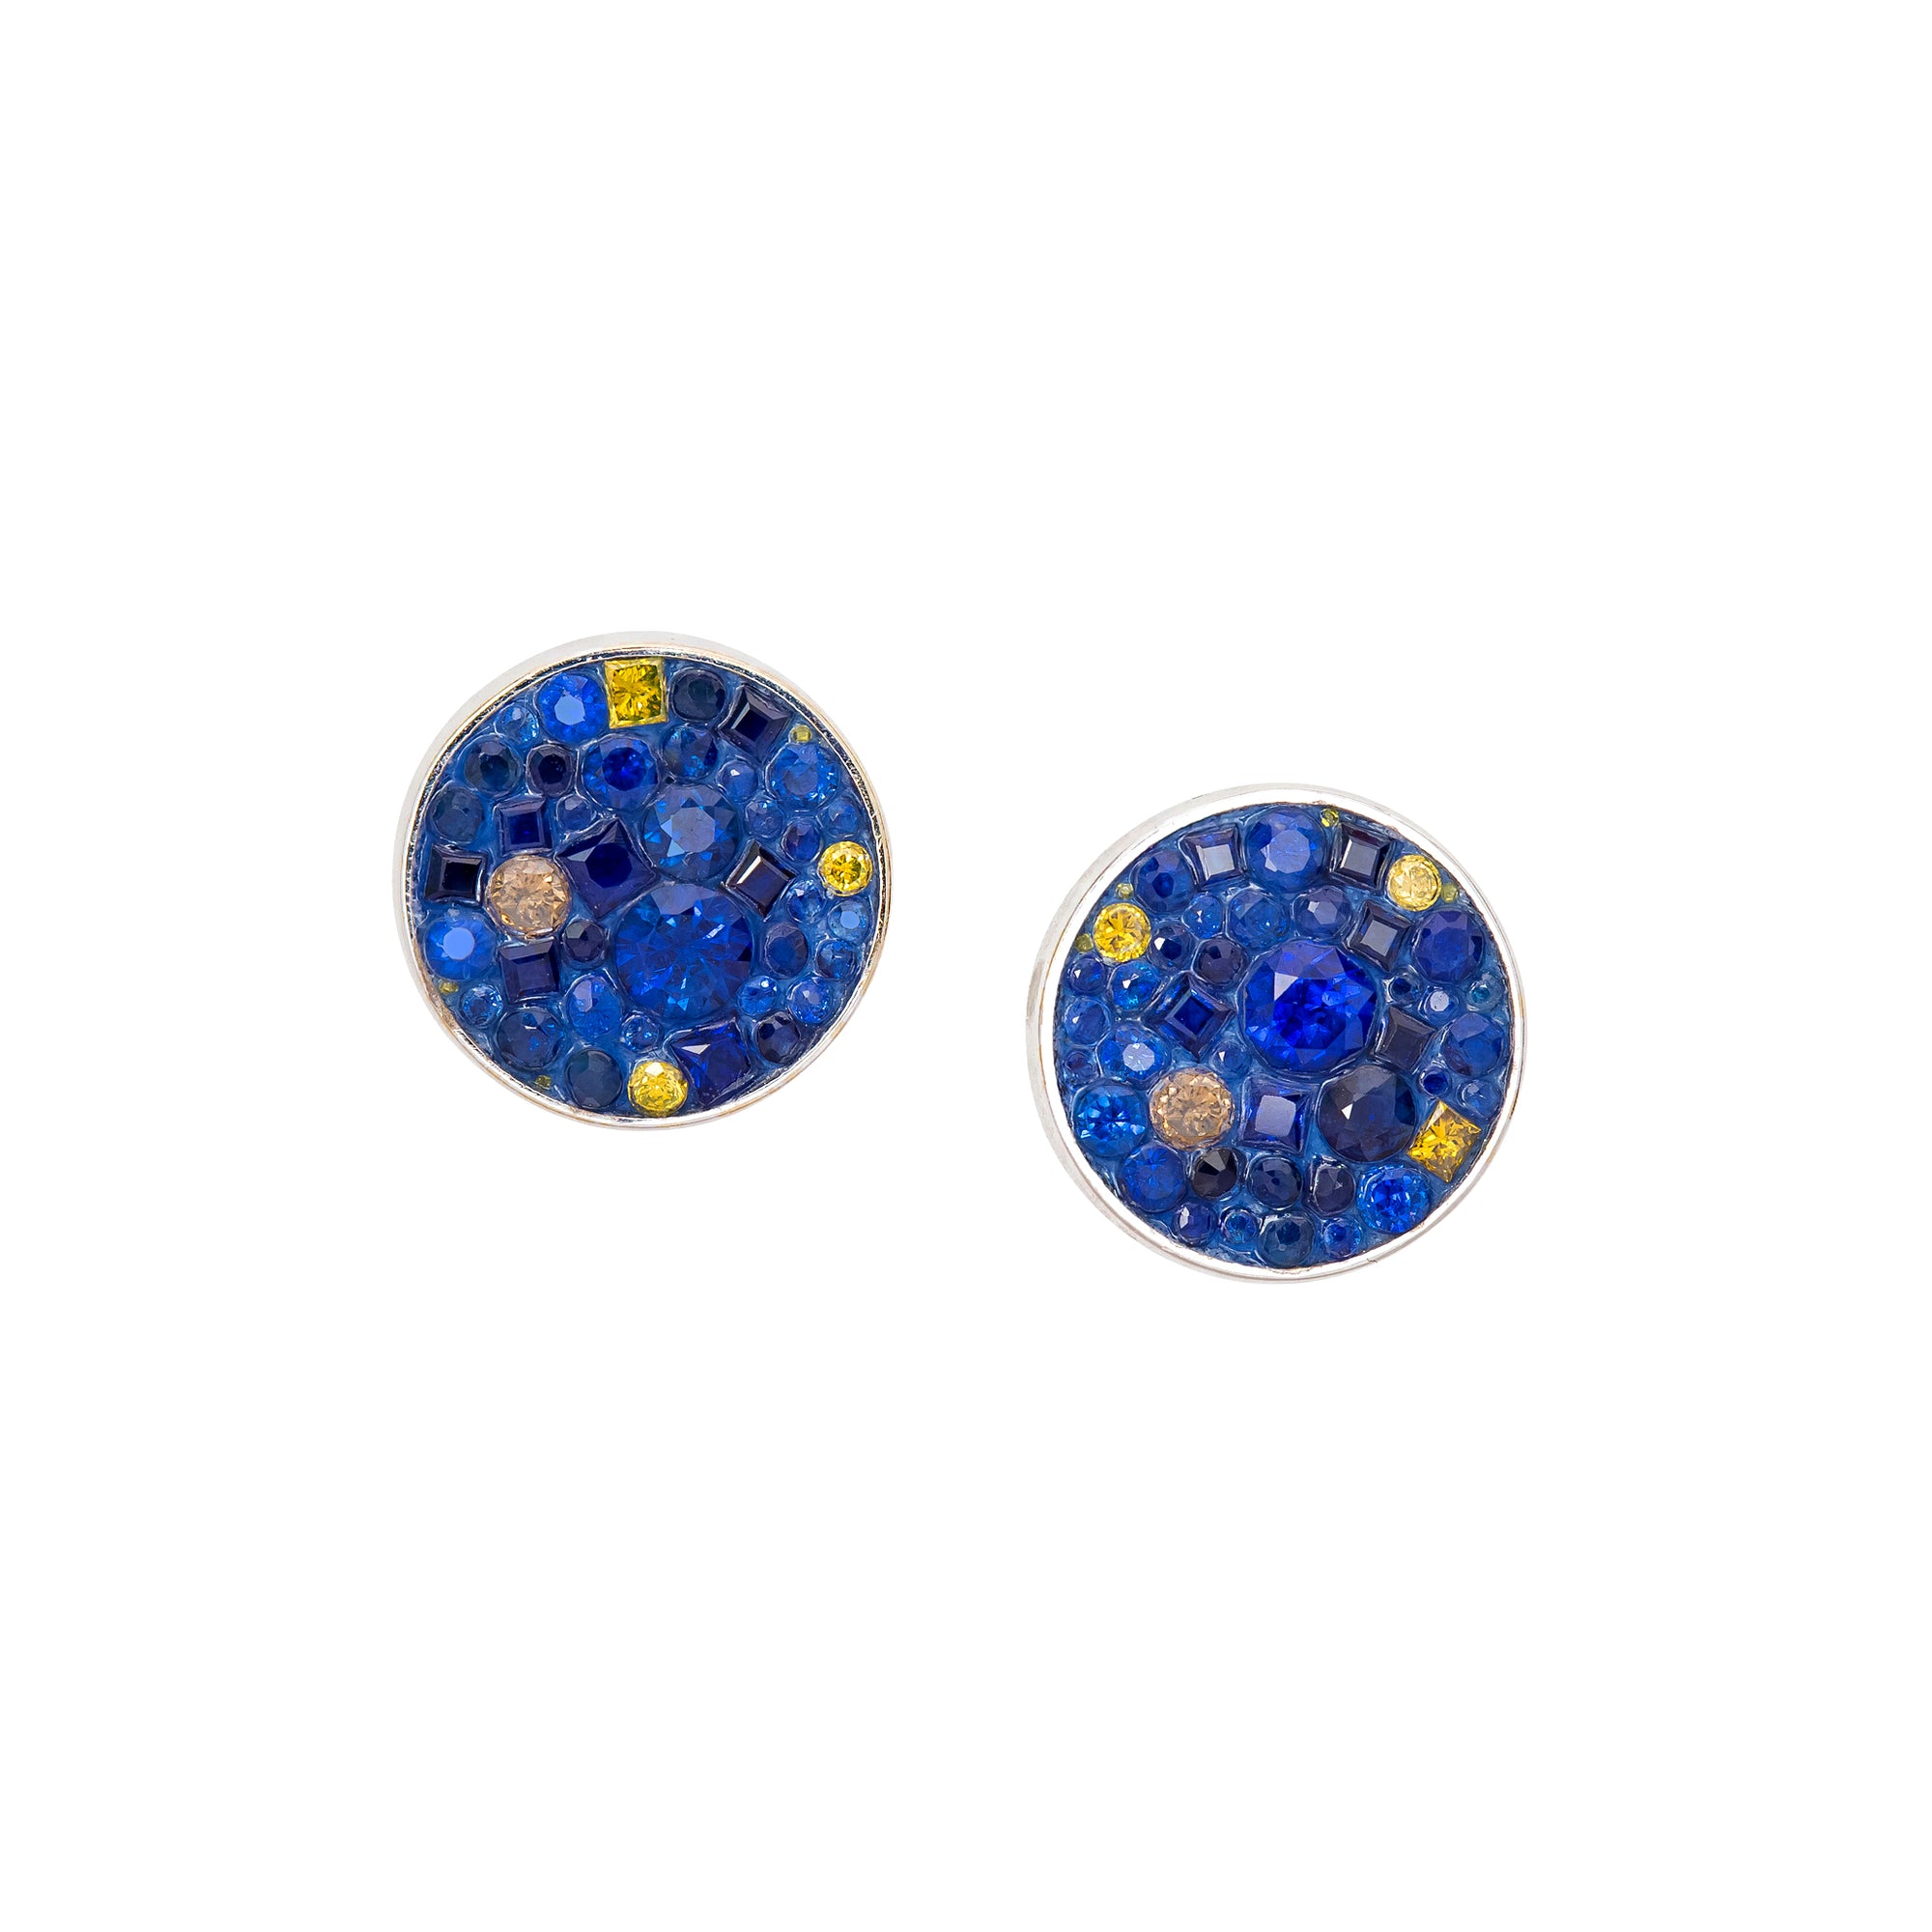 Deep Ocean Sapphire & Diamond Stud Earrings by Pleve available at Talisman Collection Fine Jewelers in El Dorado Hills, CA and online. Specs: 1.85 cts color enhanced diamonds, natural sapphires, 18k white gold. 